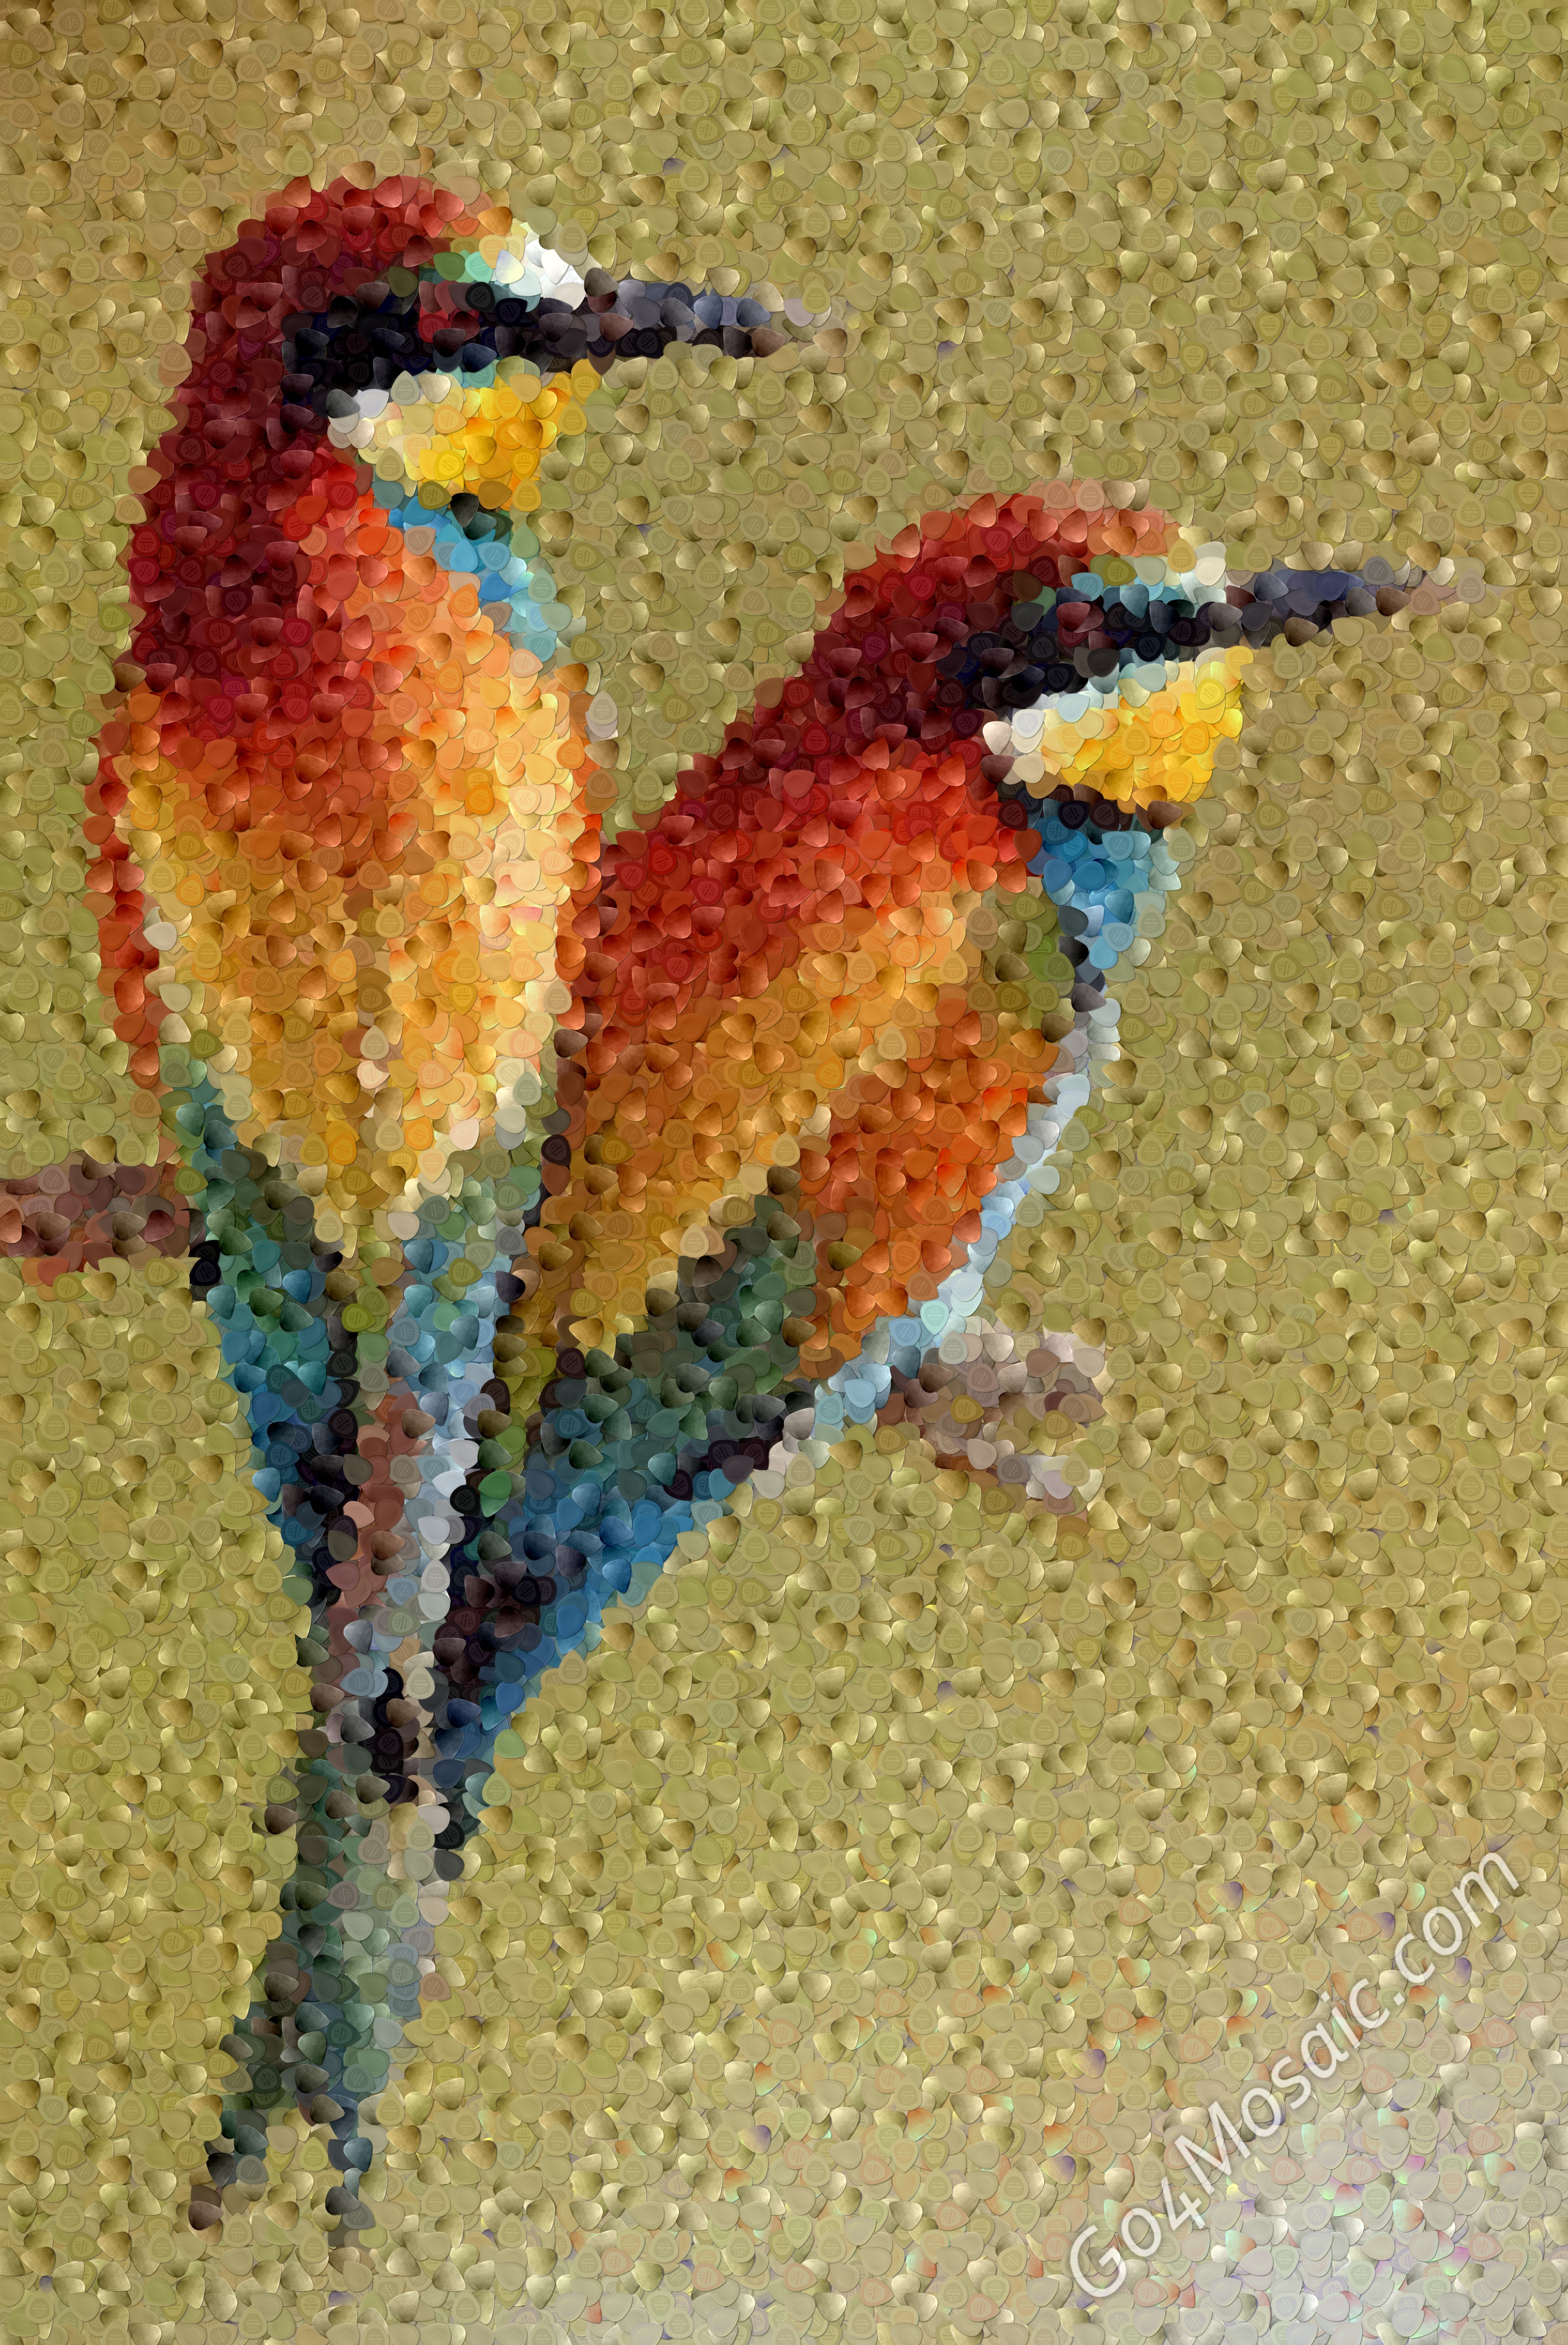 Colorful Birds mosaic from guitar picks